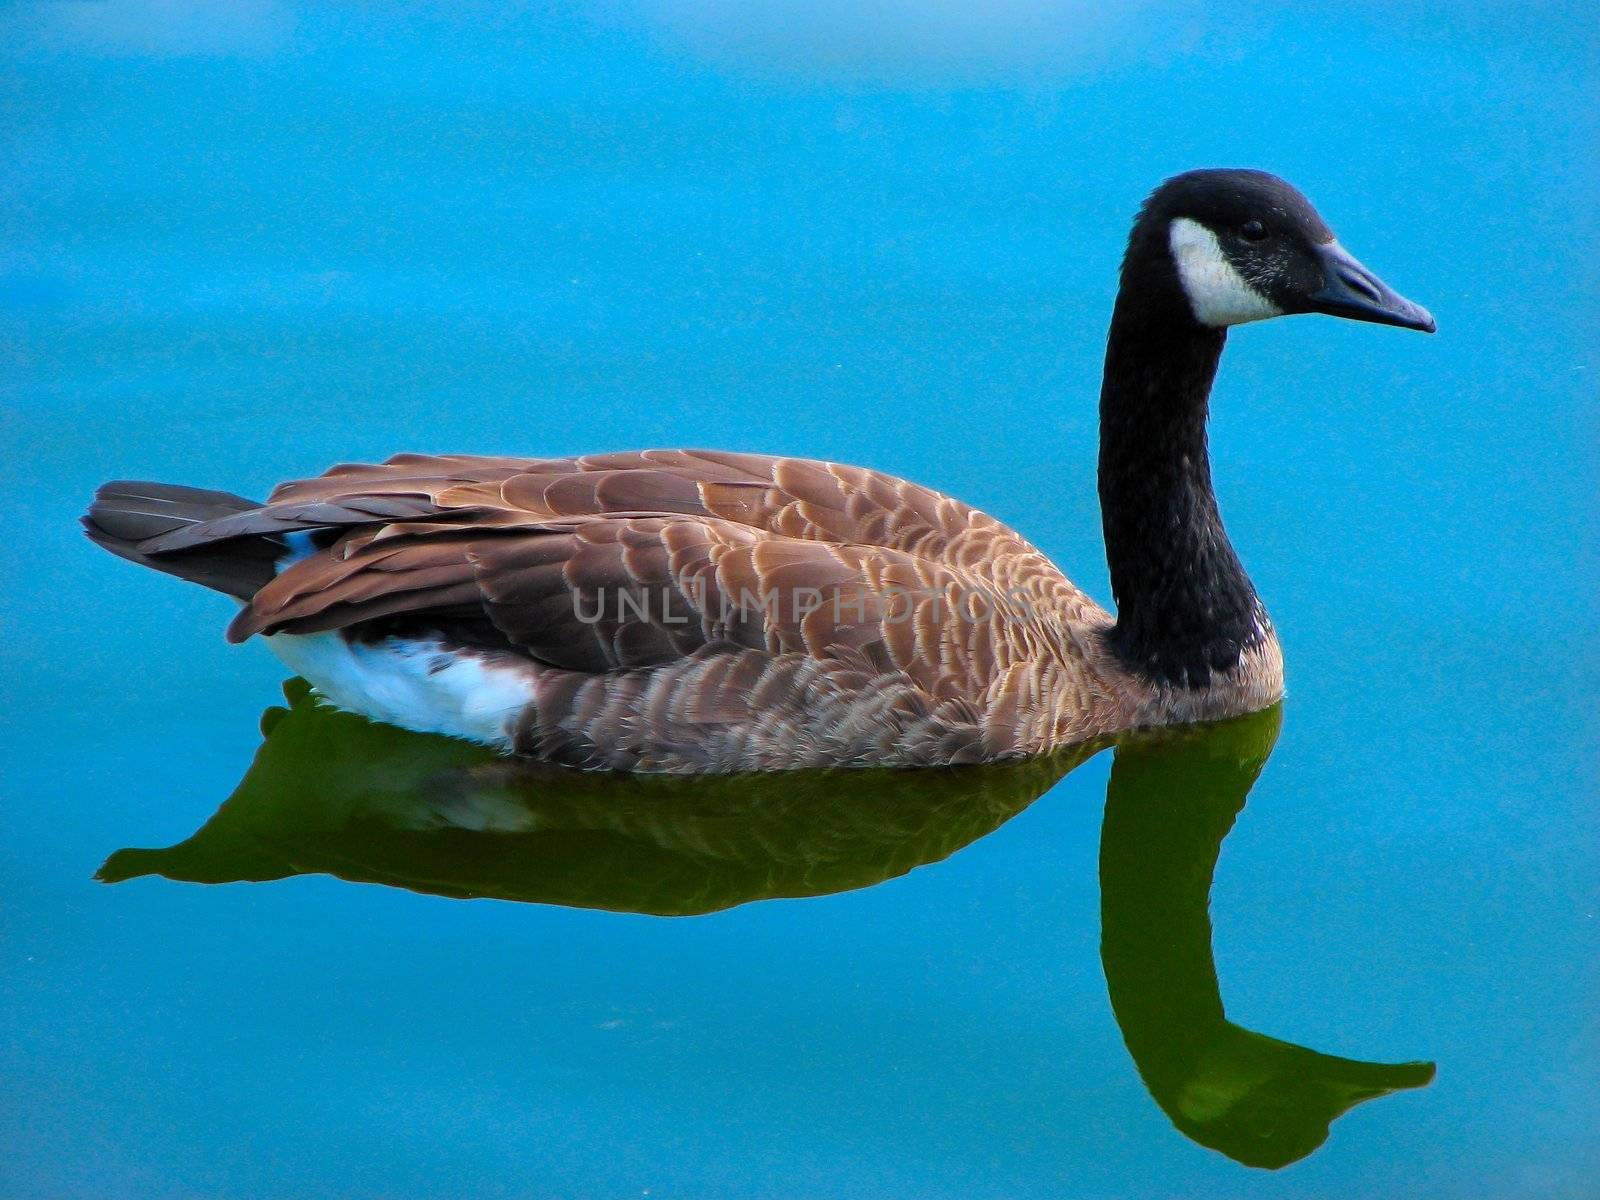 Goose in the blue water, summer, sky